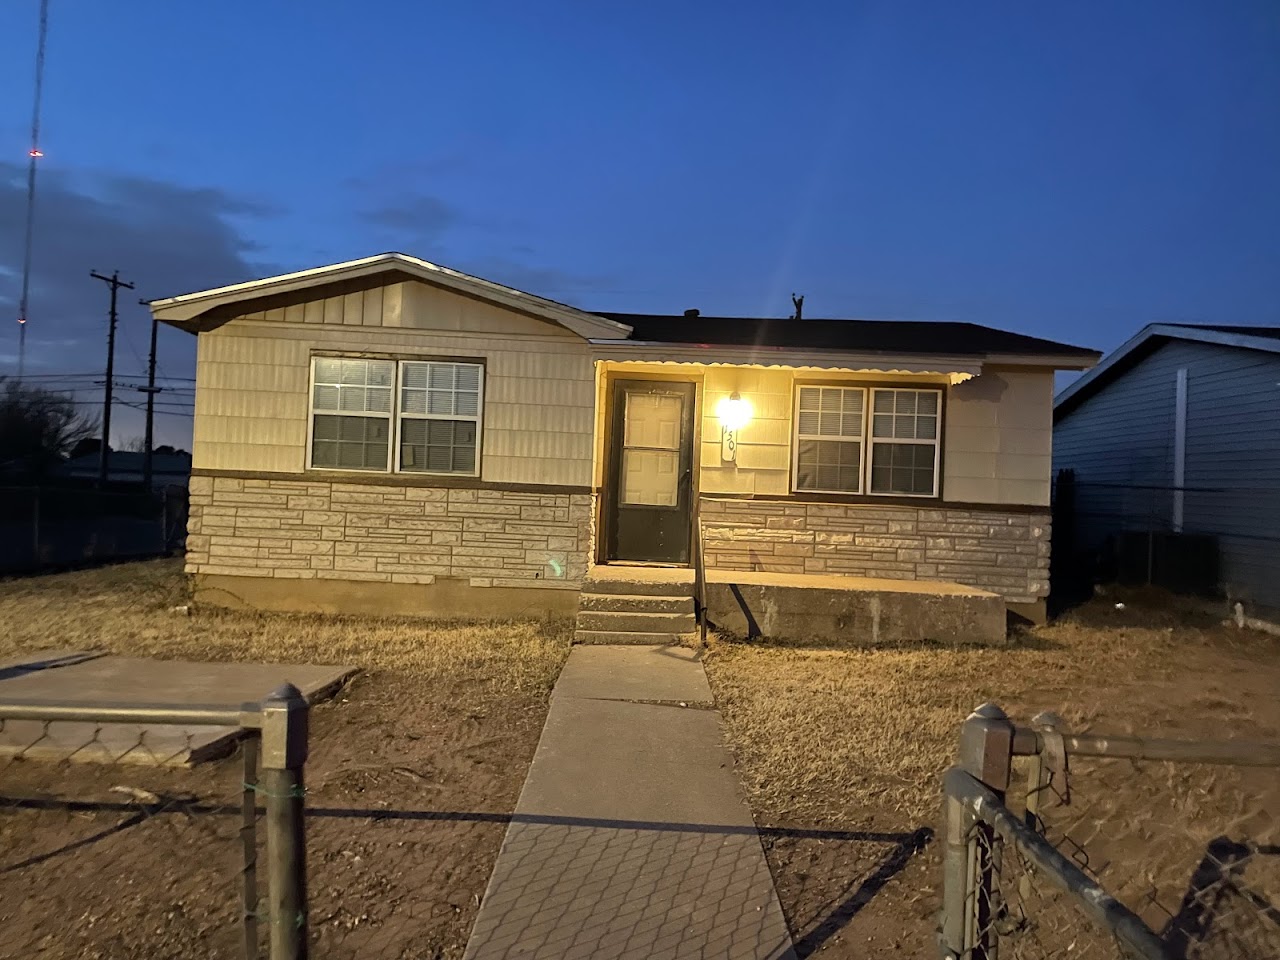 Photo of PARK MEADOWS VILLAS. Affordable housing located at 2502 WEBER DR LUBBOCK, TX 79404